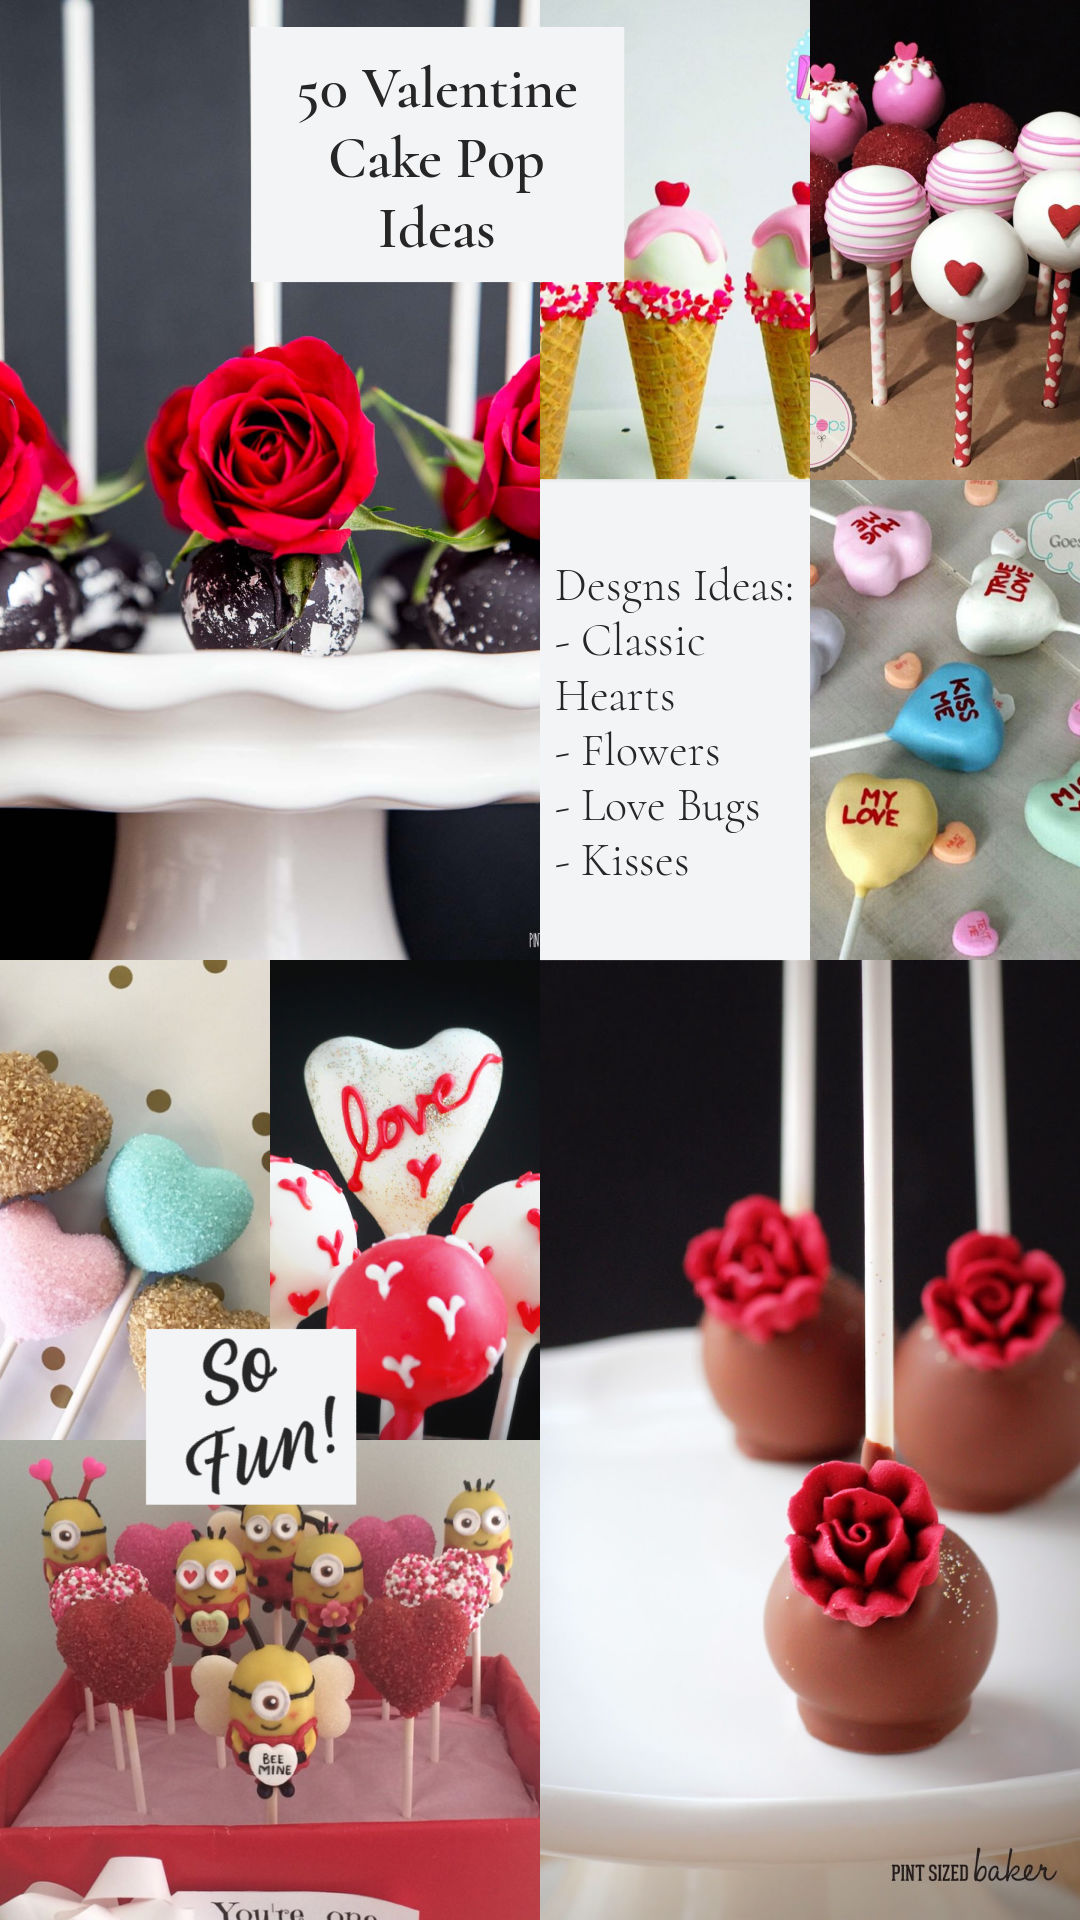 Searching for Valentine inspiration? I've got 50 Valentine Cake Pop ideas that will knock your socks off!